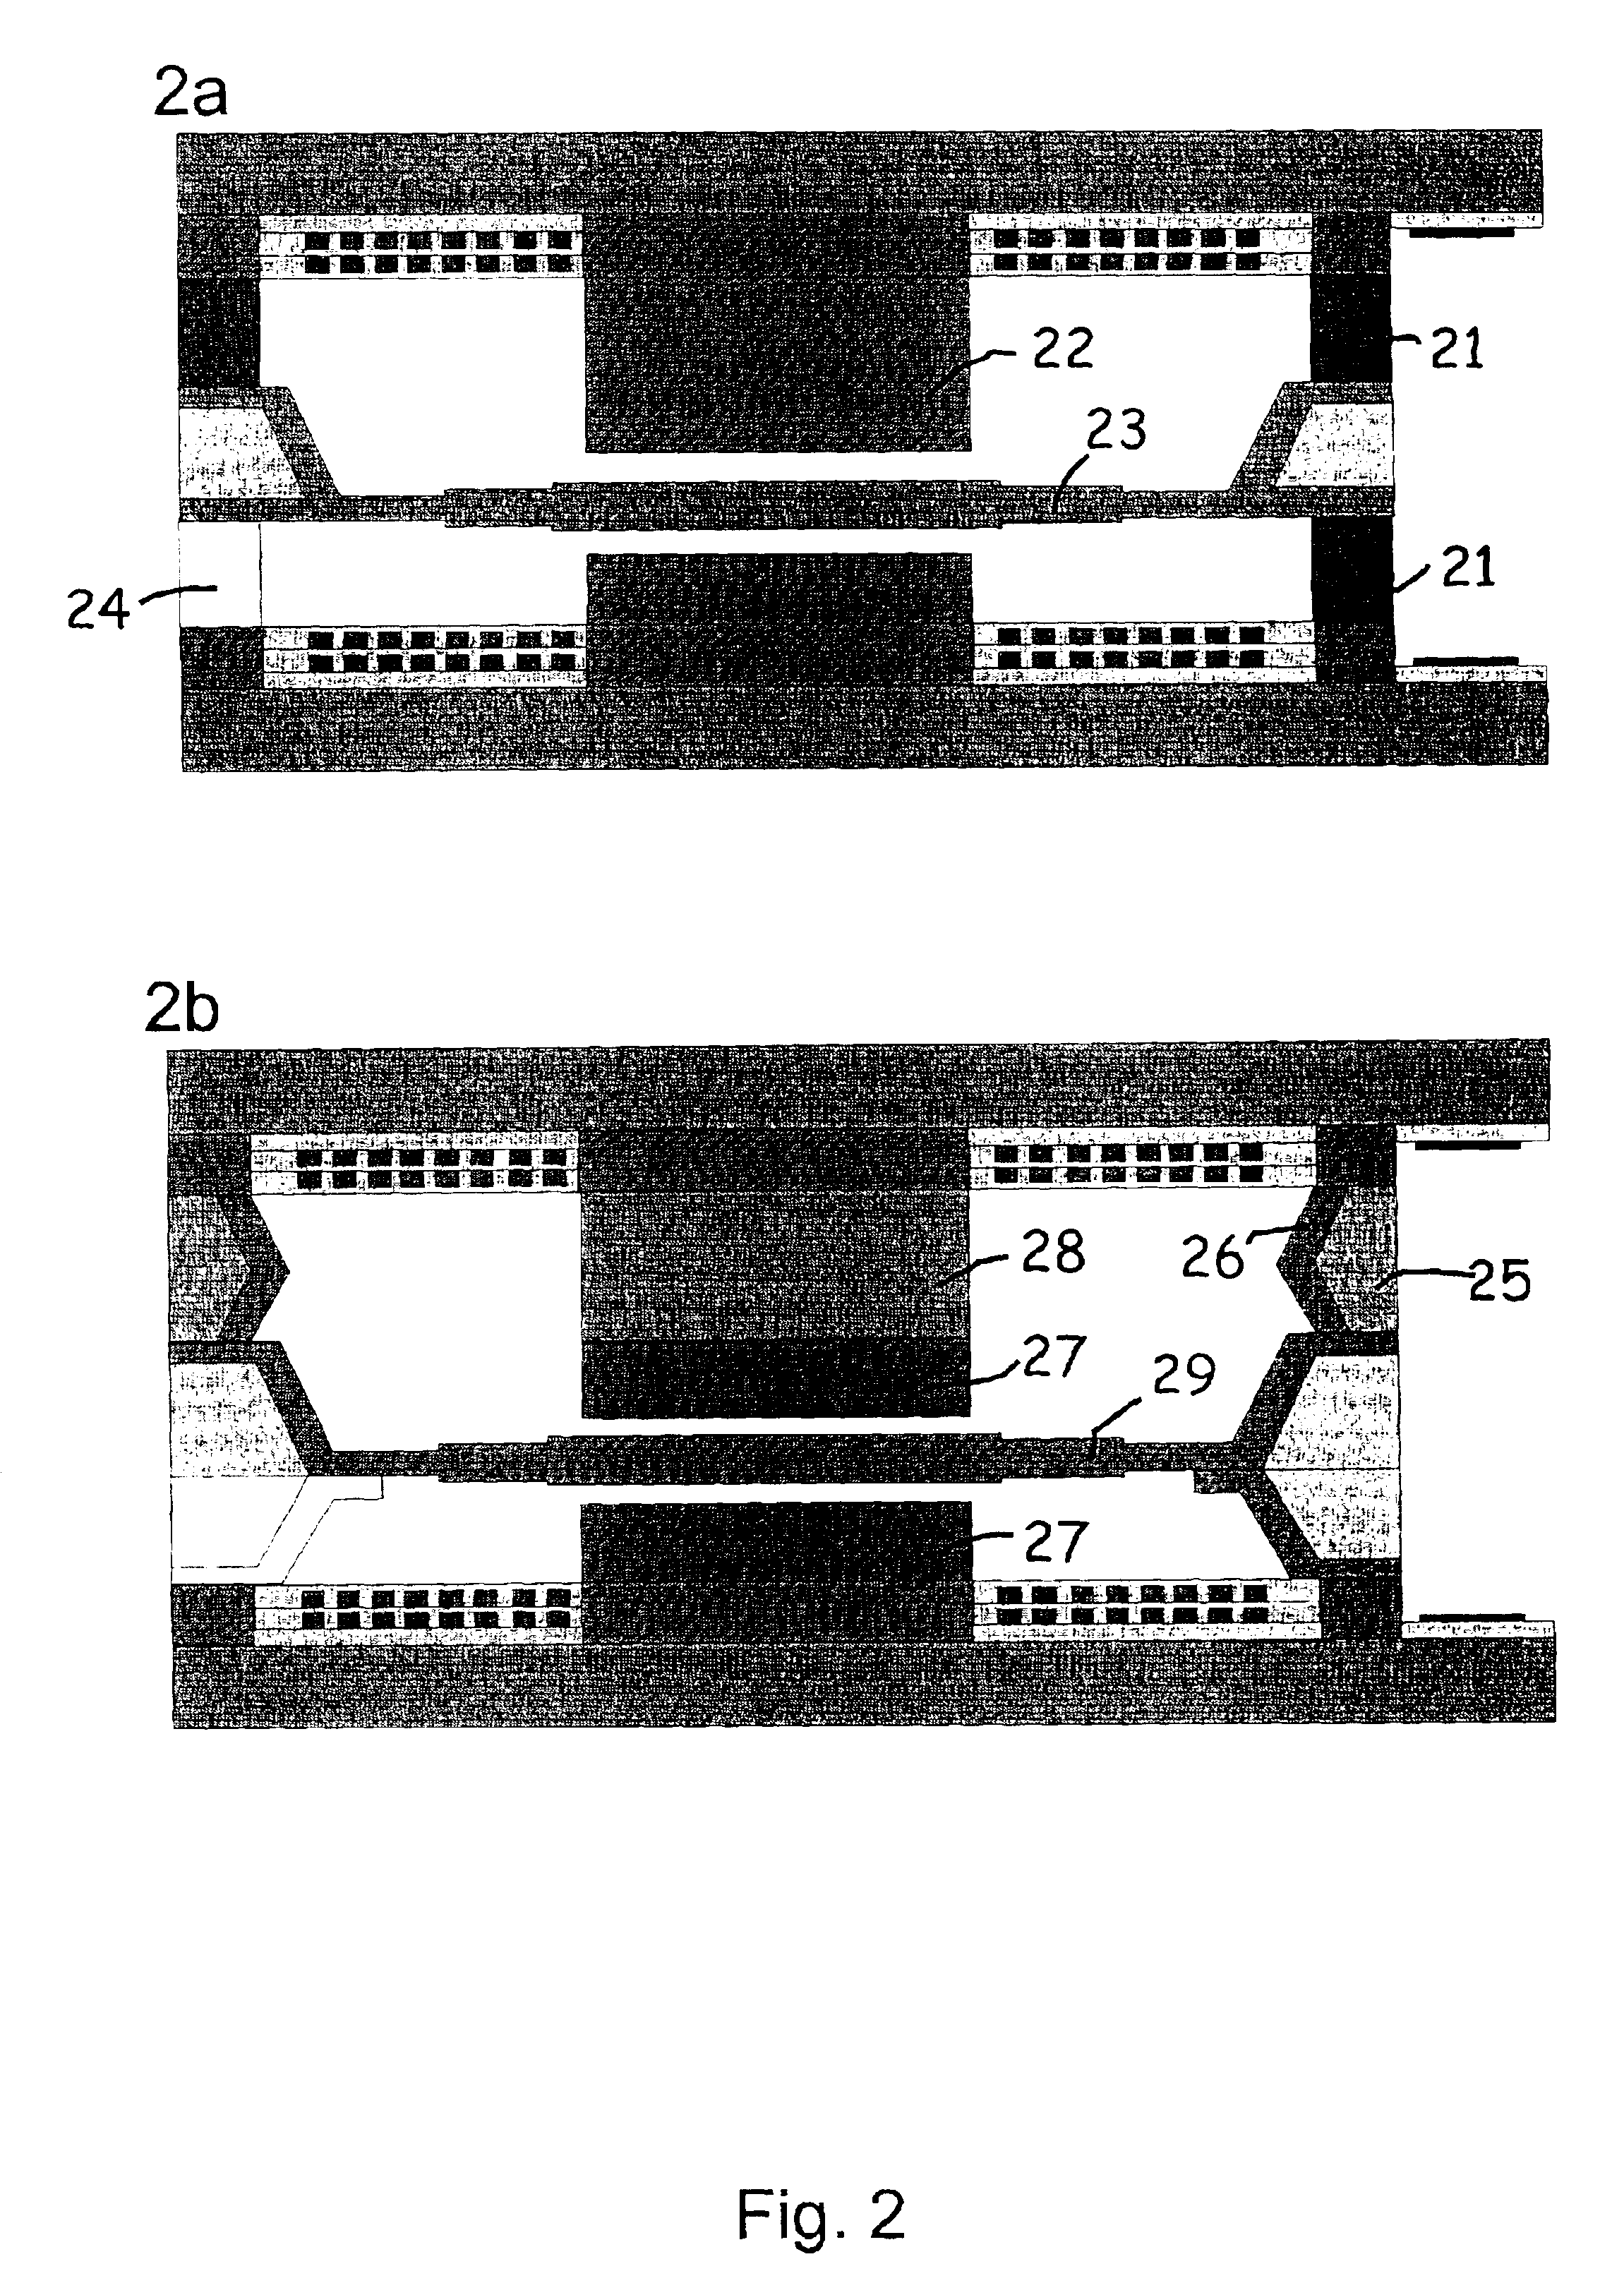 Micromachined magnetically balanced membrane actuator